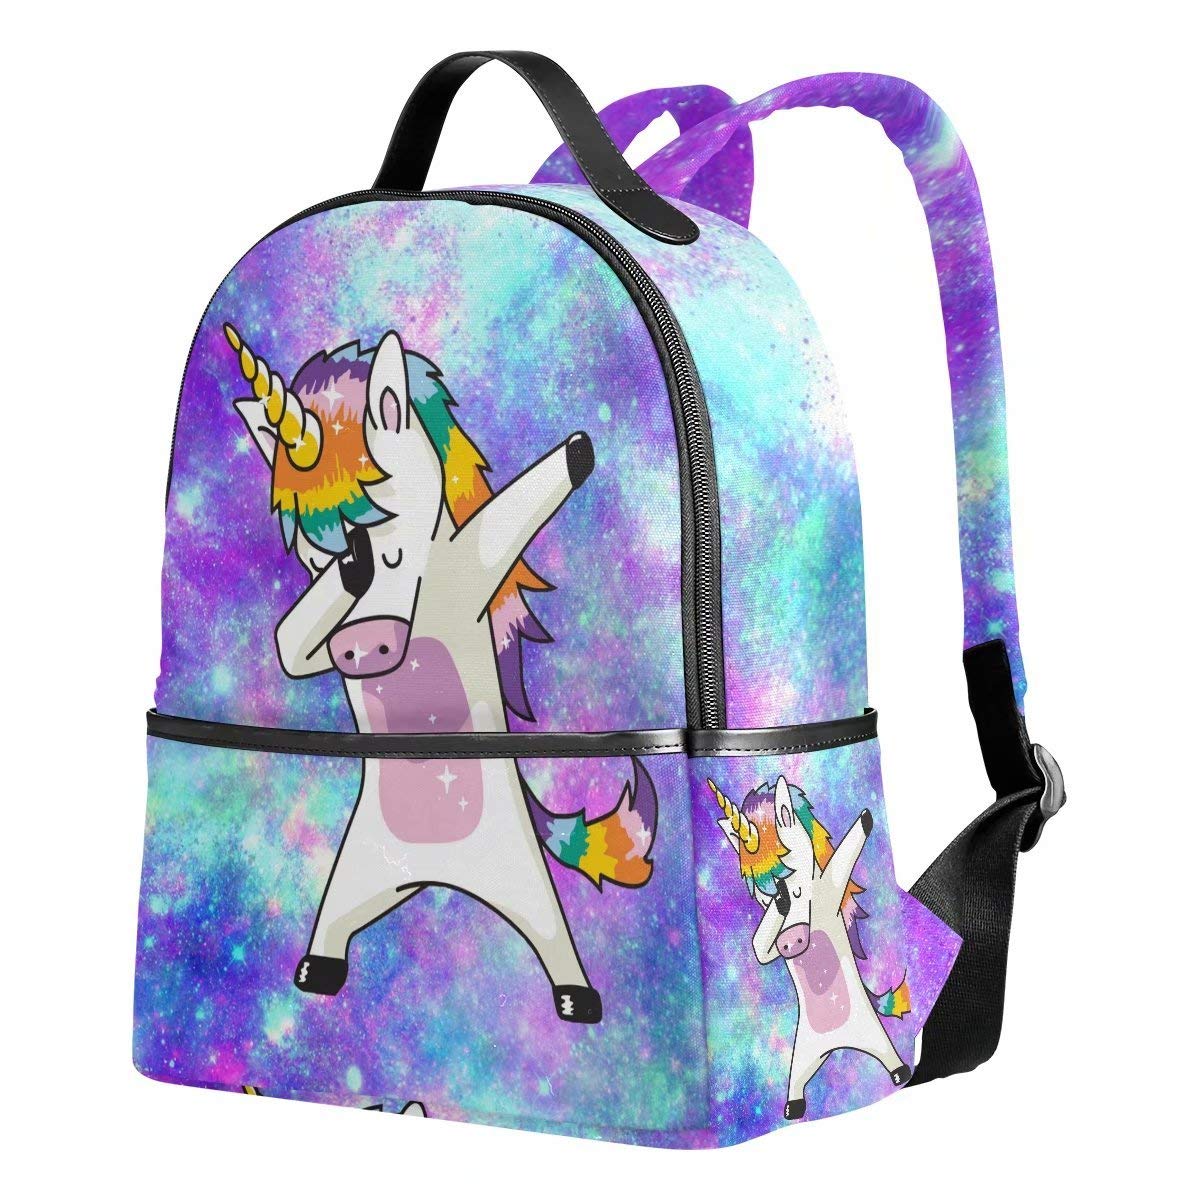 UNICORN BACKPACK,THE ULTIMATE GIFT GUIDE, GIFT GUIDE FOR WOMEN, GIFT GUIDE FOR MEN, GIFT GUIDE FOR KIDS, GIFT GUIDE FOR TEENS, CHRISTMAS WISHLIST, CHRISTMAS GIFT GUIDE, ULTIMATE GIFT GUIDE, GIFT GUIDE FOR EVERYONE ON YOUR LIST, HOLIDAY GIFT GUIDE